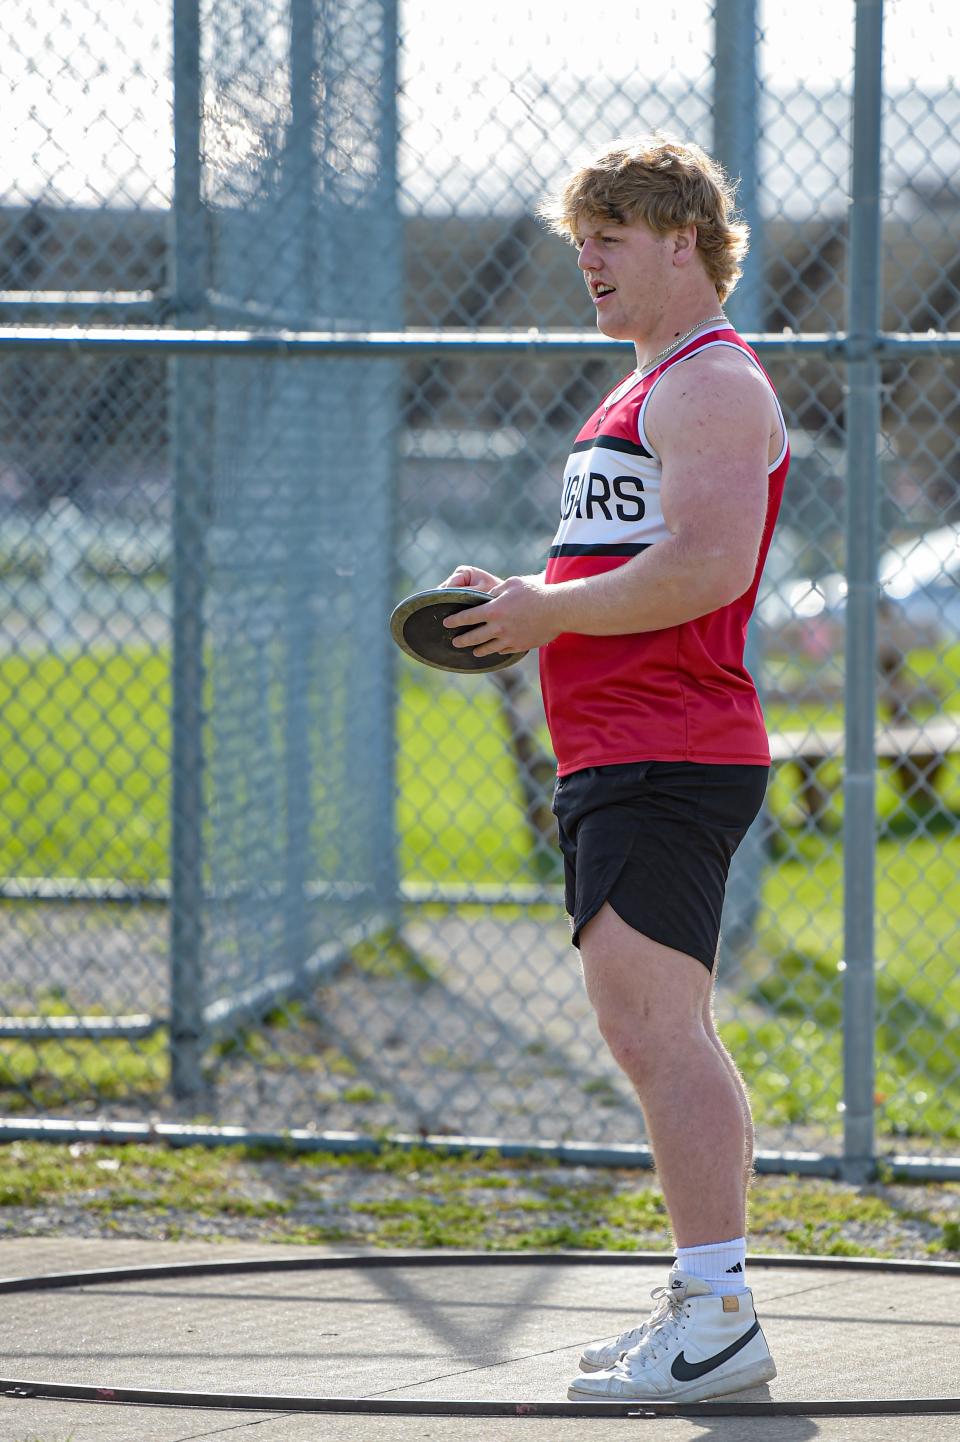 Crestview senior Wade Bolin is closing in on shot put and discus records that have stood at the school for more than 60 years.